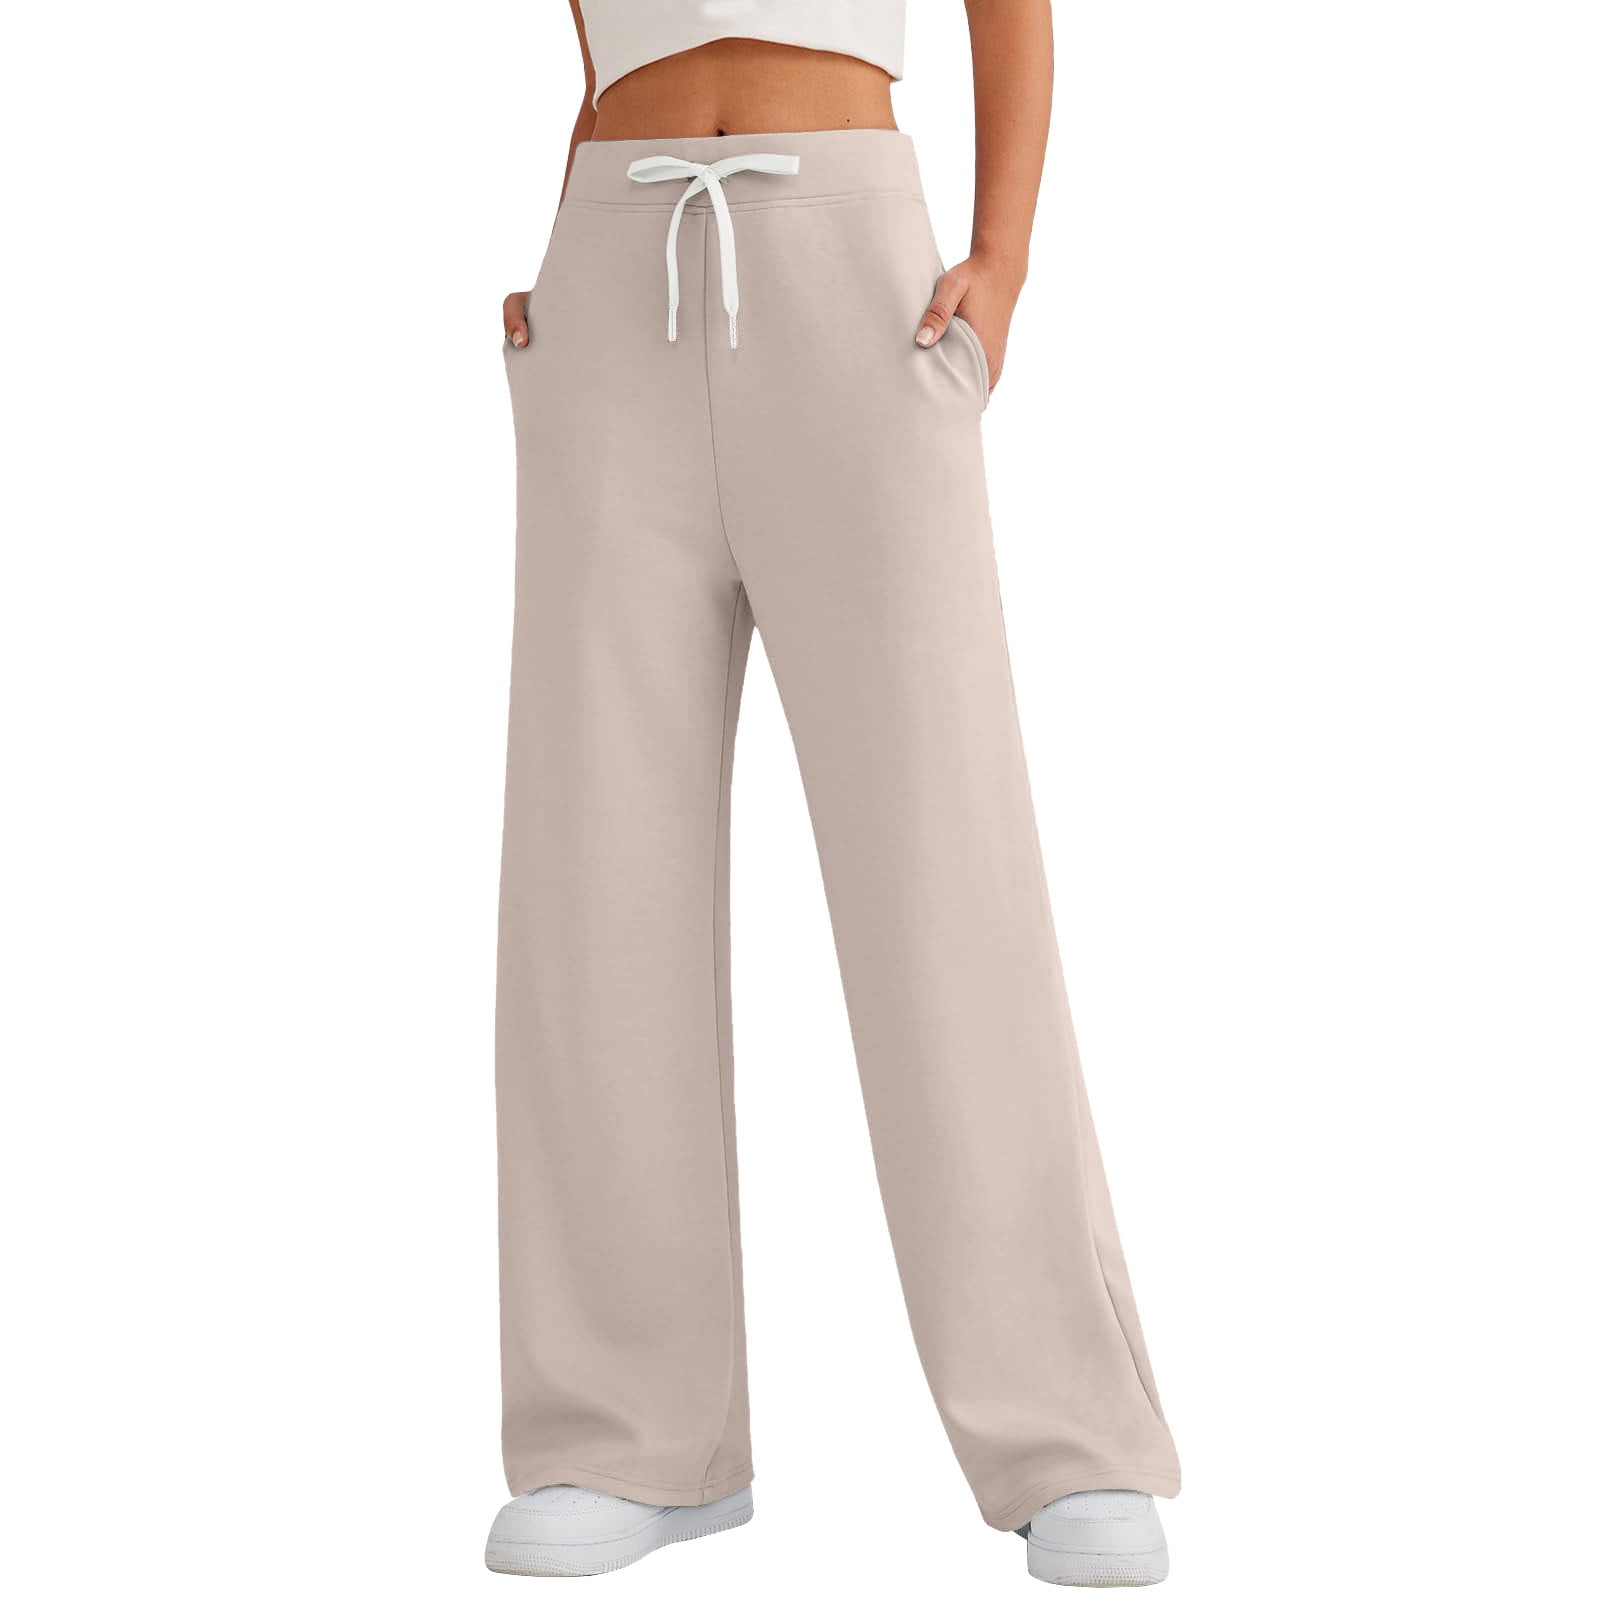 Susanny Women's Sweatpants Cotton with Pockets Open Bottom Petite Wide Leg  High Waisted Drawstring Athletic Works Girls Sweatpants Flare Clearance  Jogger Pants Cotton Winter Baggy Pants White 2XL 